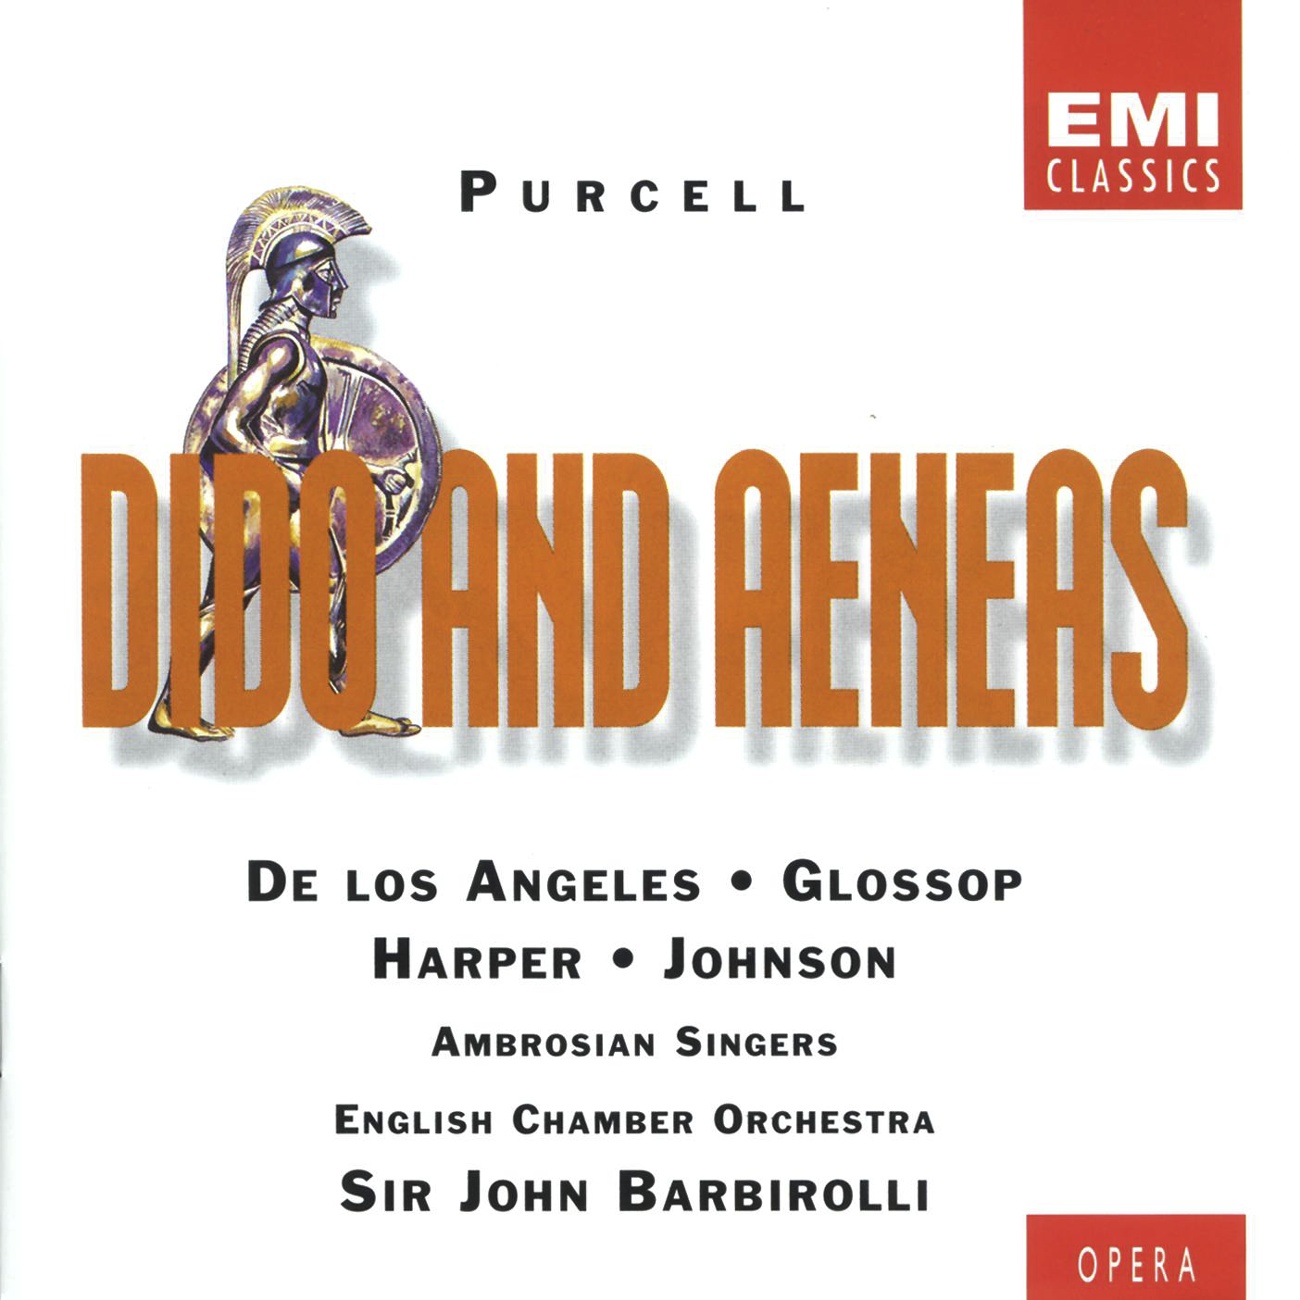 PURCELL: DIDO AND AENEAS: HARM'S OUR DELIGHT AND MISCHIEF ALL OUR SKILL